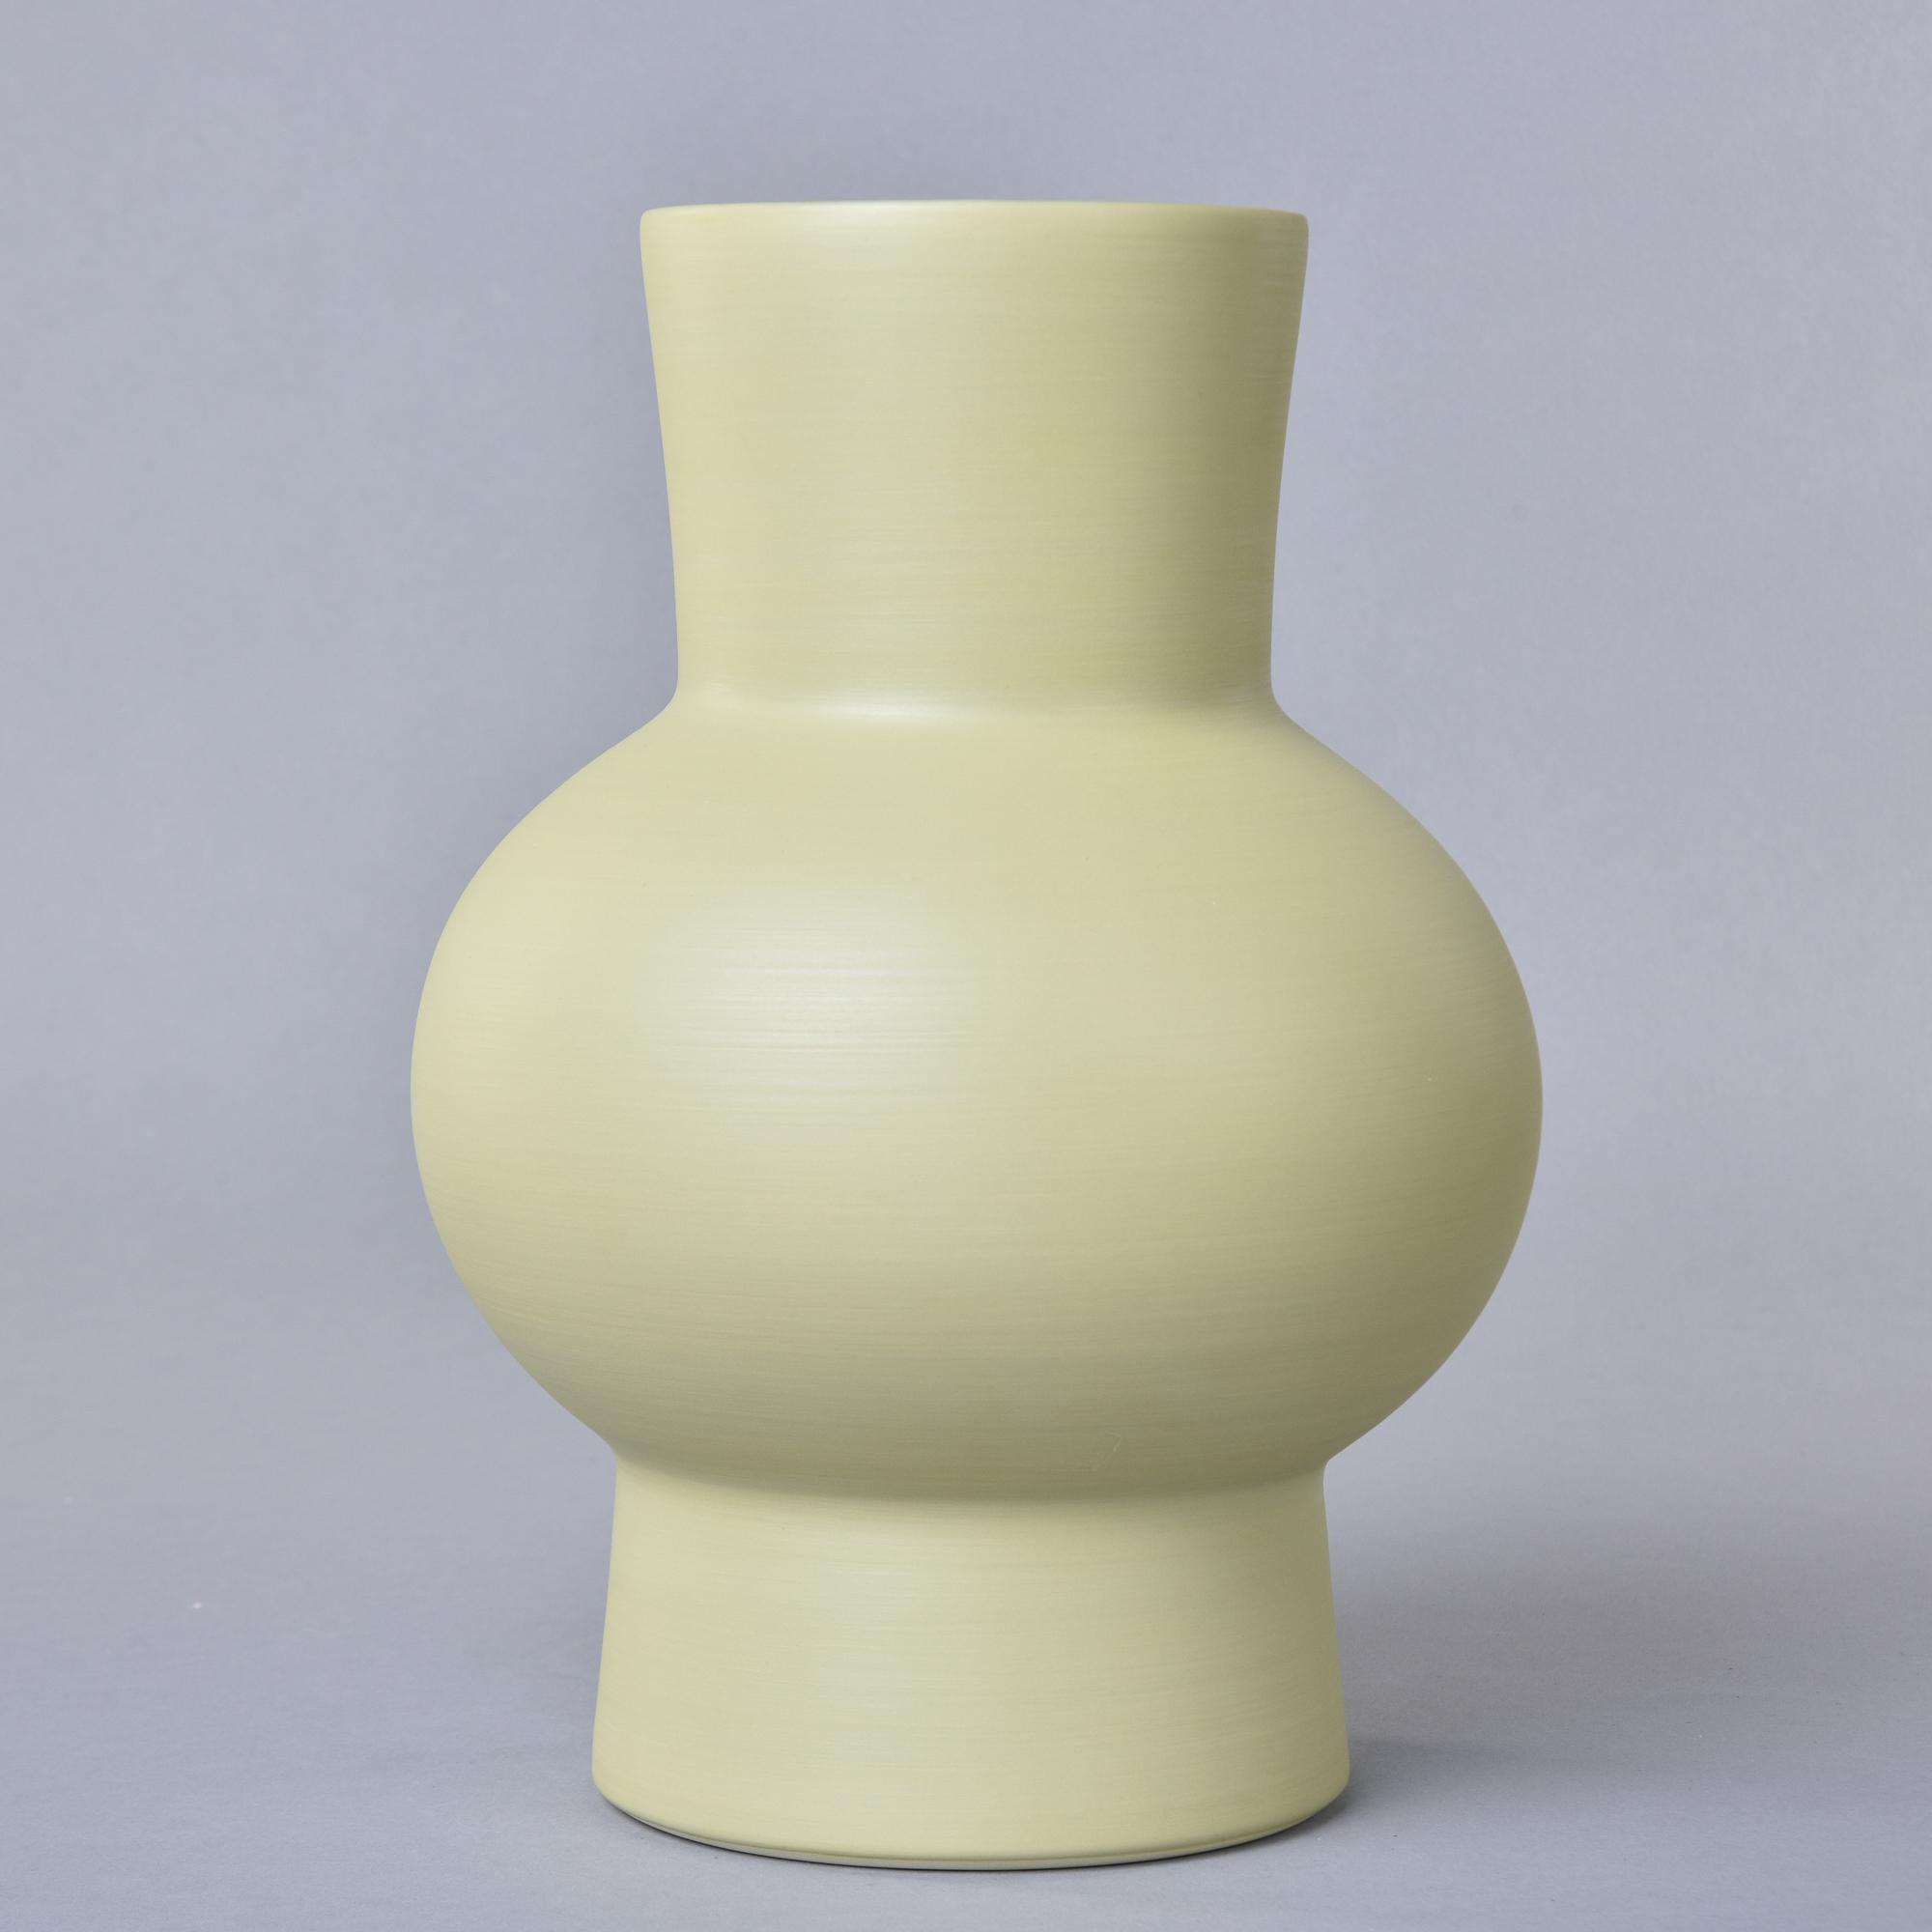 New and made in Italy by Rina Menardi, this thin-walled vase stands over 12” high and has,a pleasing shape. The pale pistachio colored glaze has a contrasting dark washed interior. Signed on underside of base. New with no flaws found. Other colors,